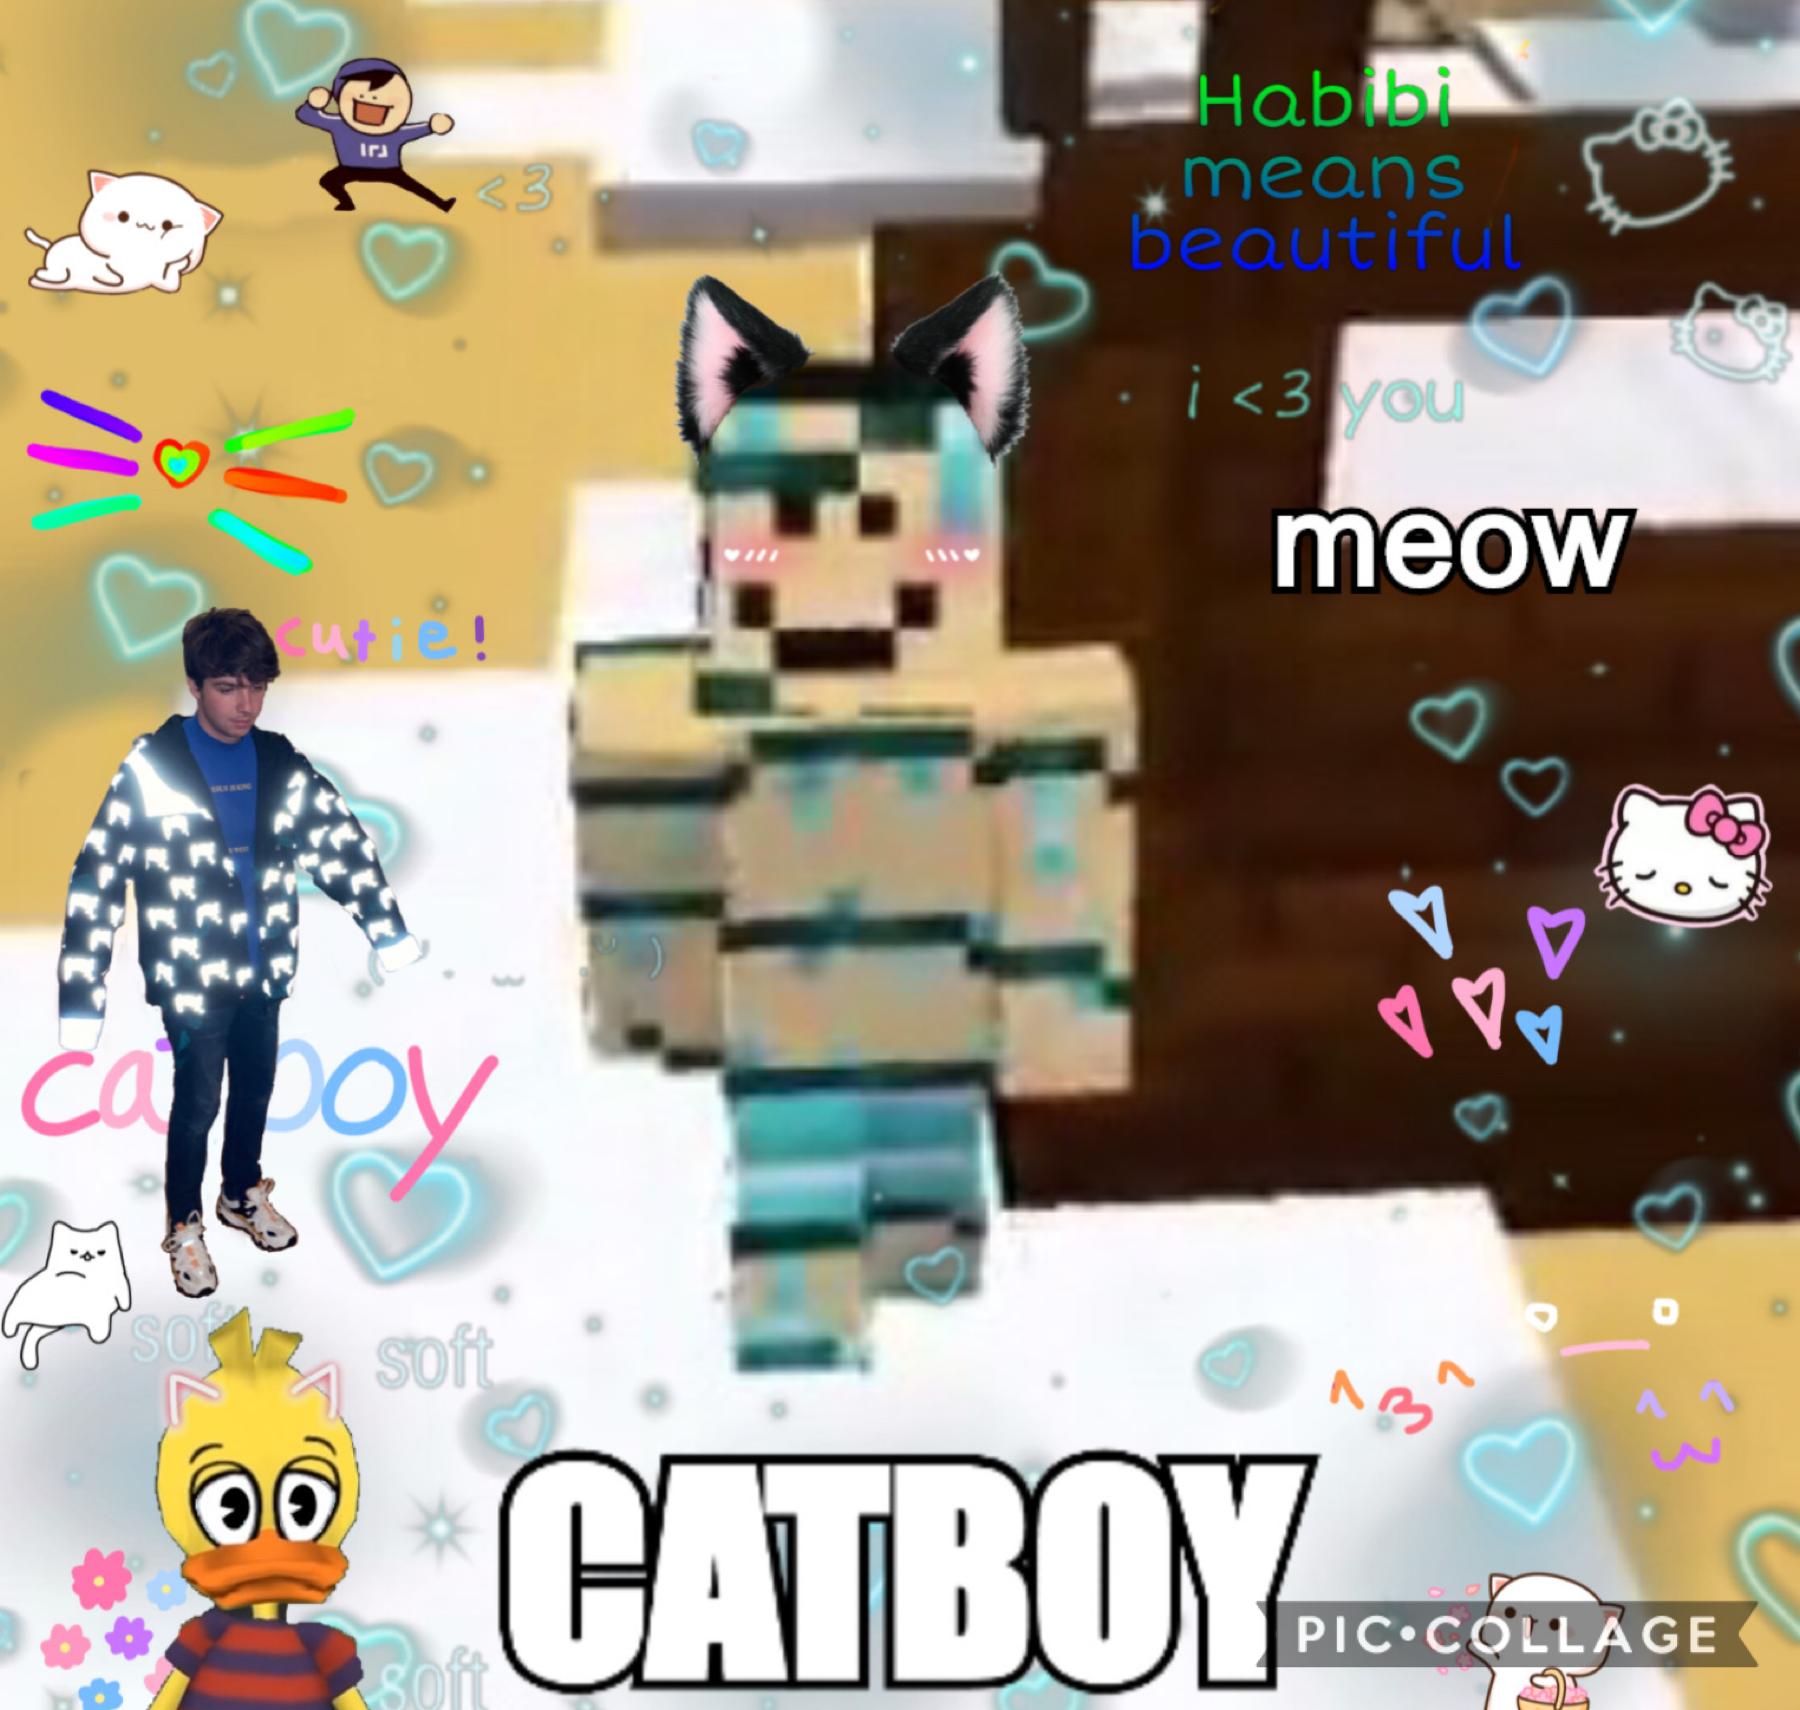 do u guys like my edit 😍😍😍 anyways mcyt xmas icons in da remixes u KNO i been on the grind 